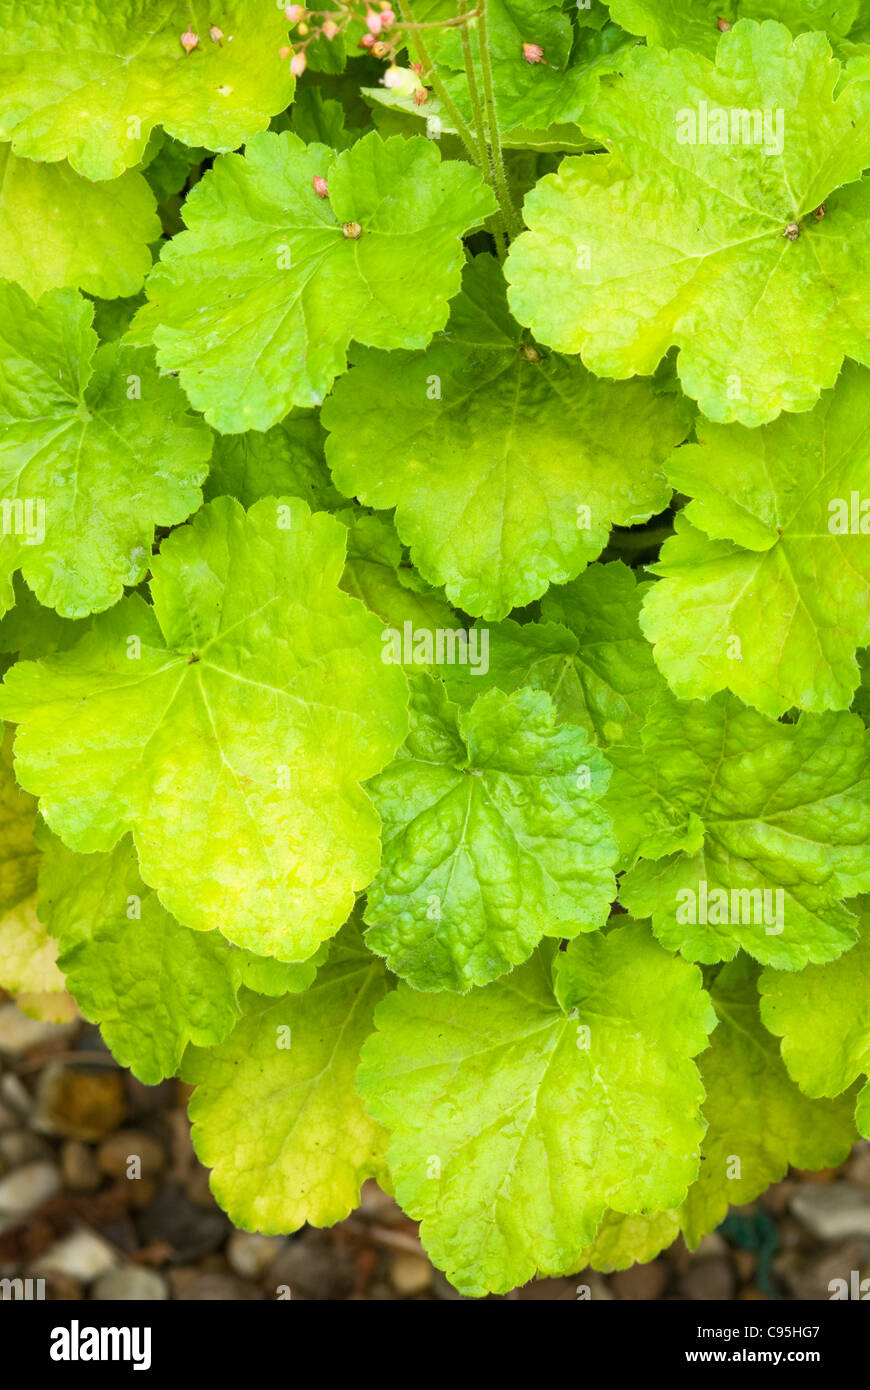 Heuchera 'Miracle’ perennial foliage plant, beautiful pretty leaves scalloped edges green yellow gold colors for shade garden Stock Photo